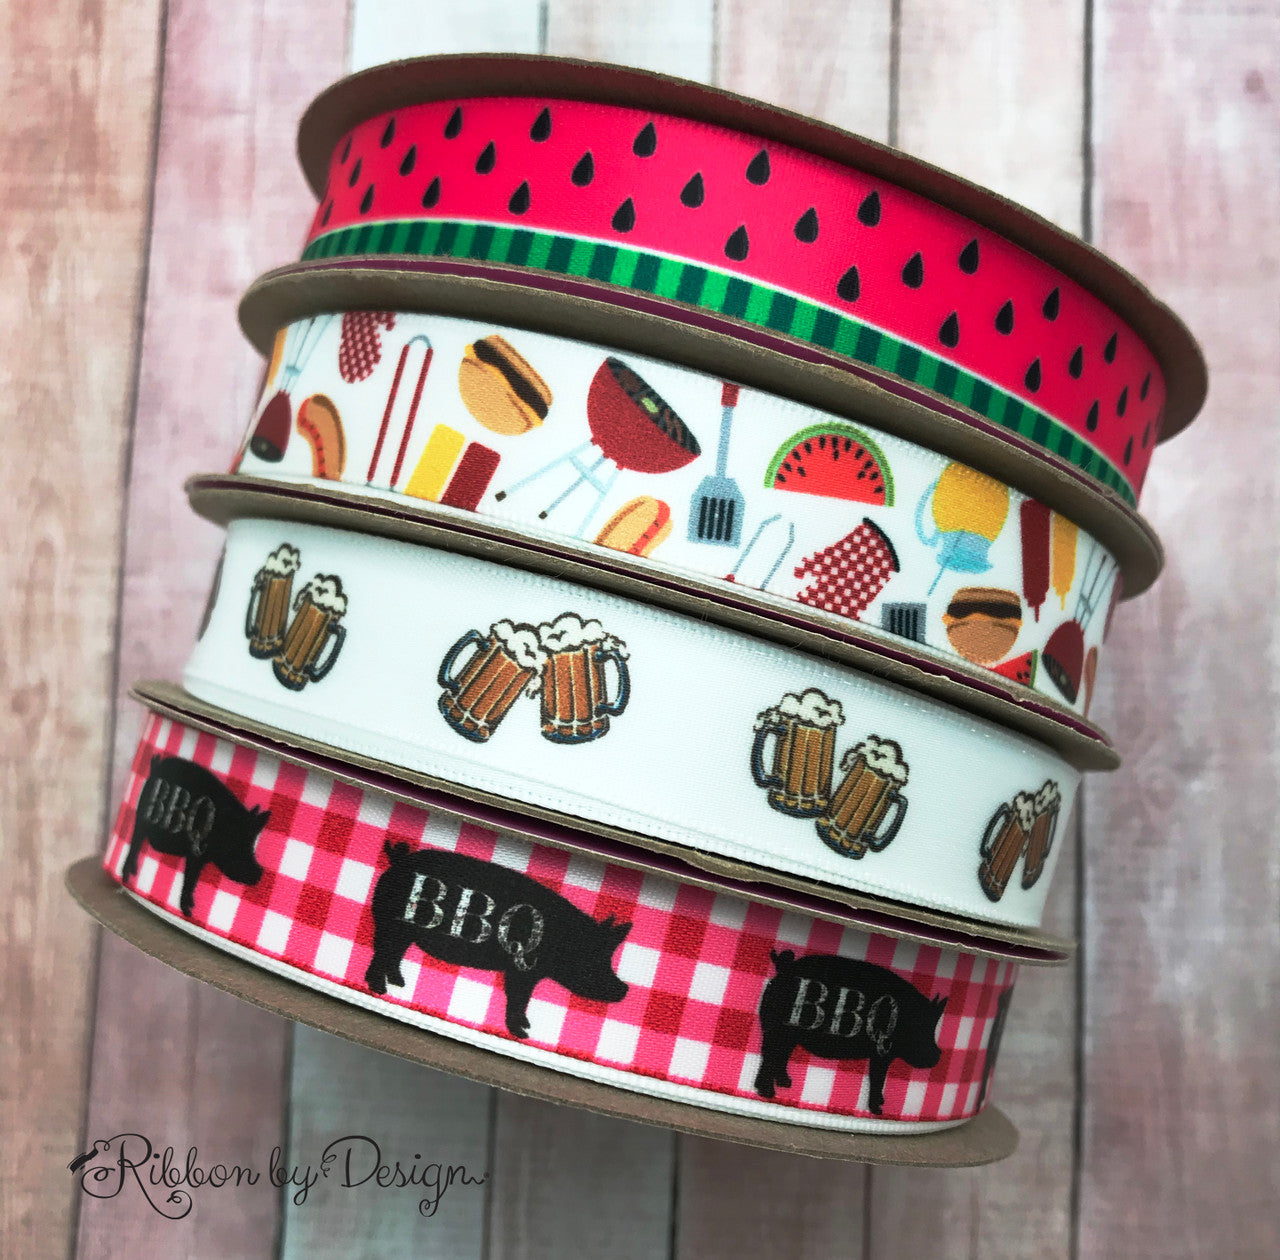 Mix and match our barbecue theme ribbons for your next back yard family party! There's something for everyone!